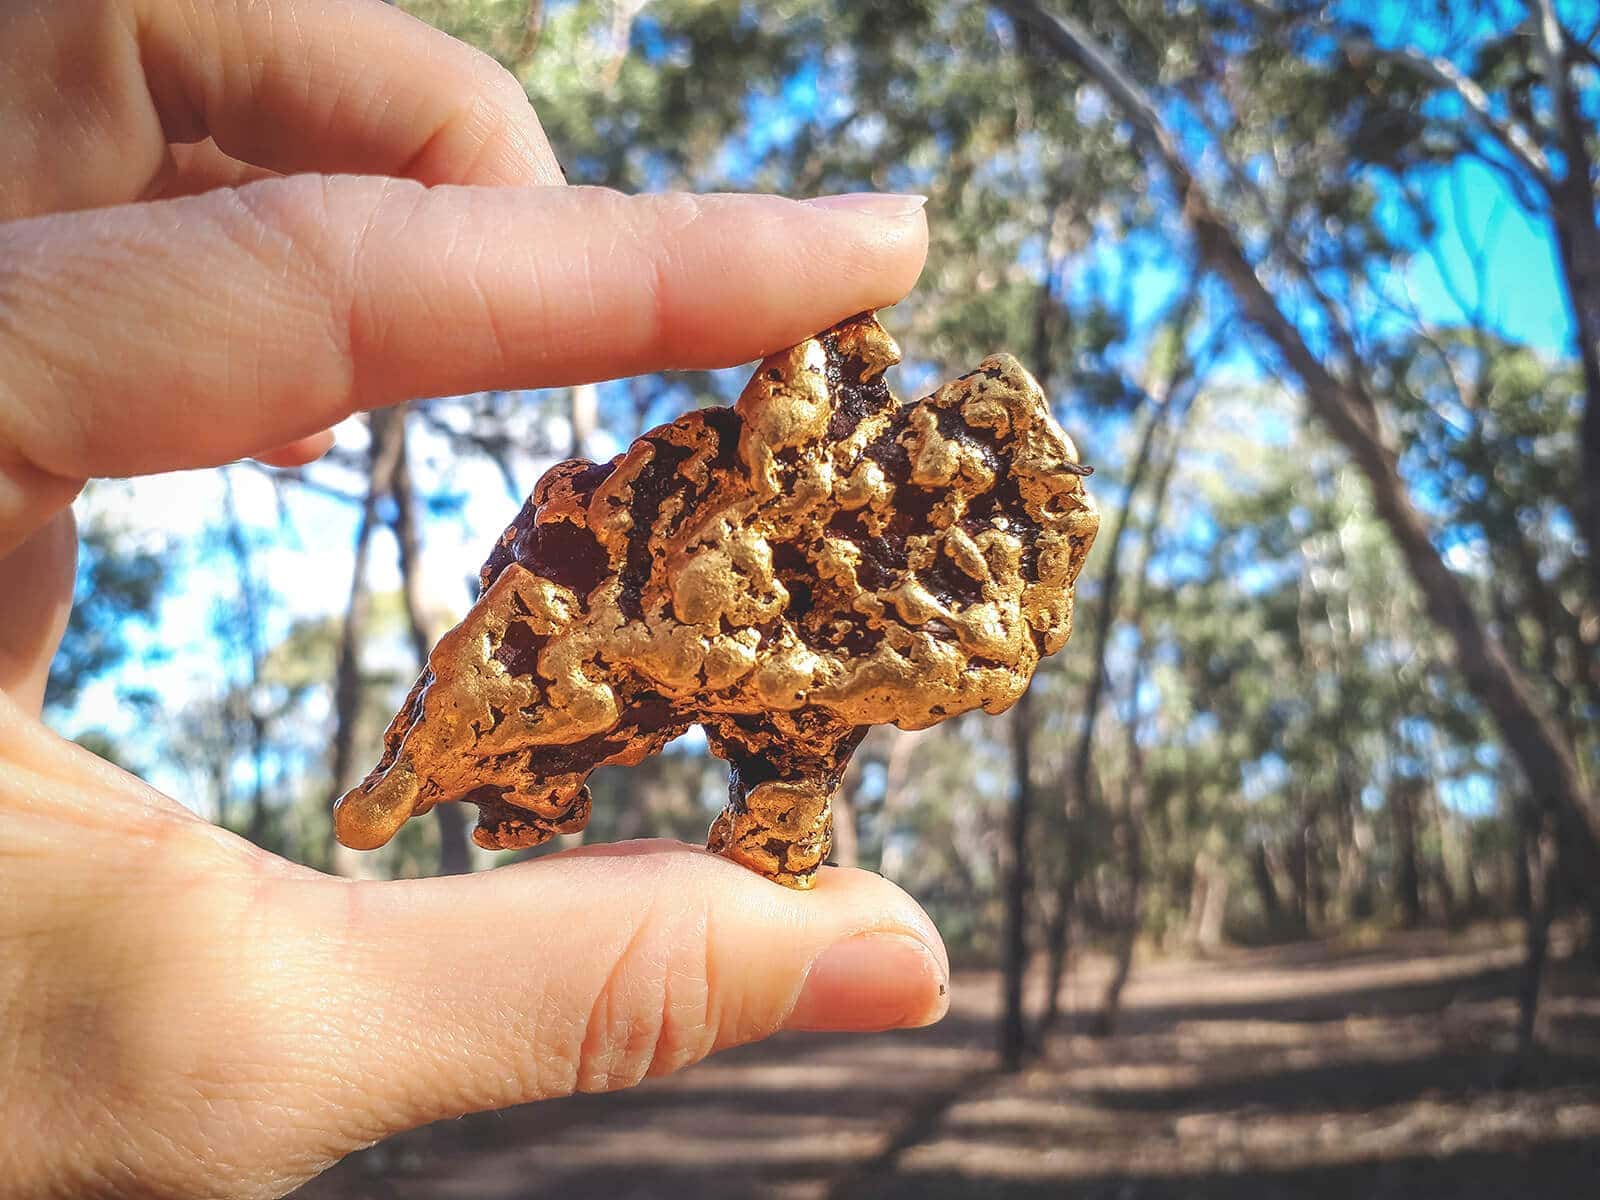 Holding up discovered gold from australian backyard